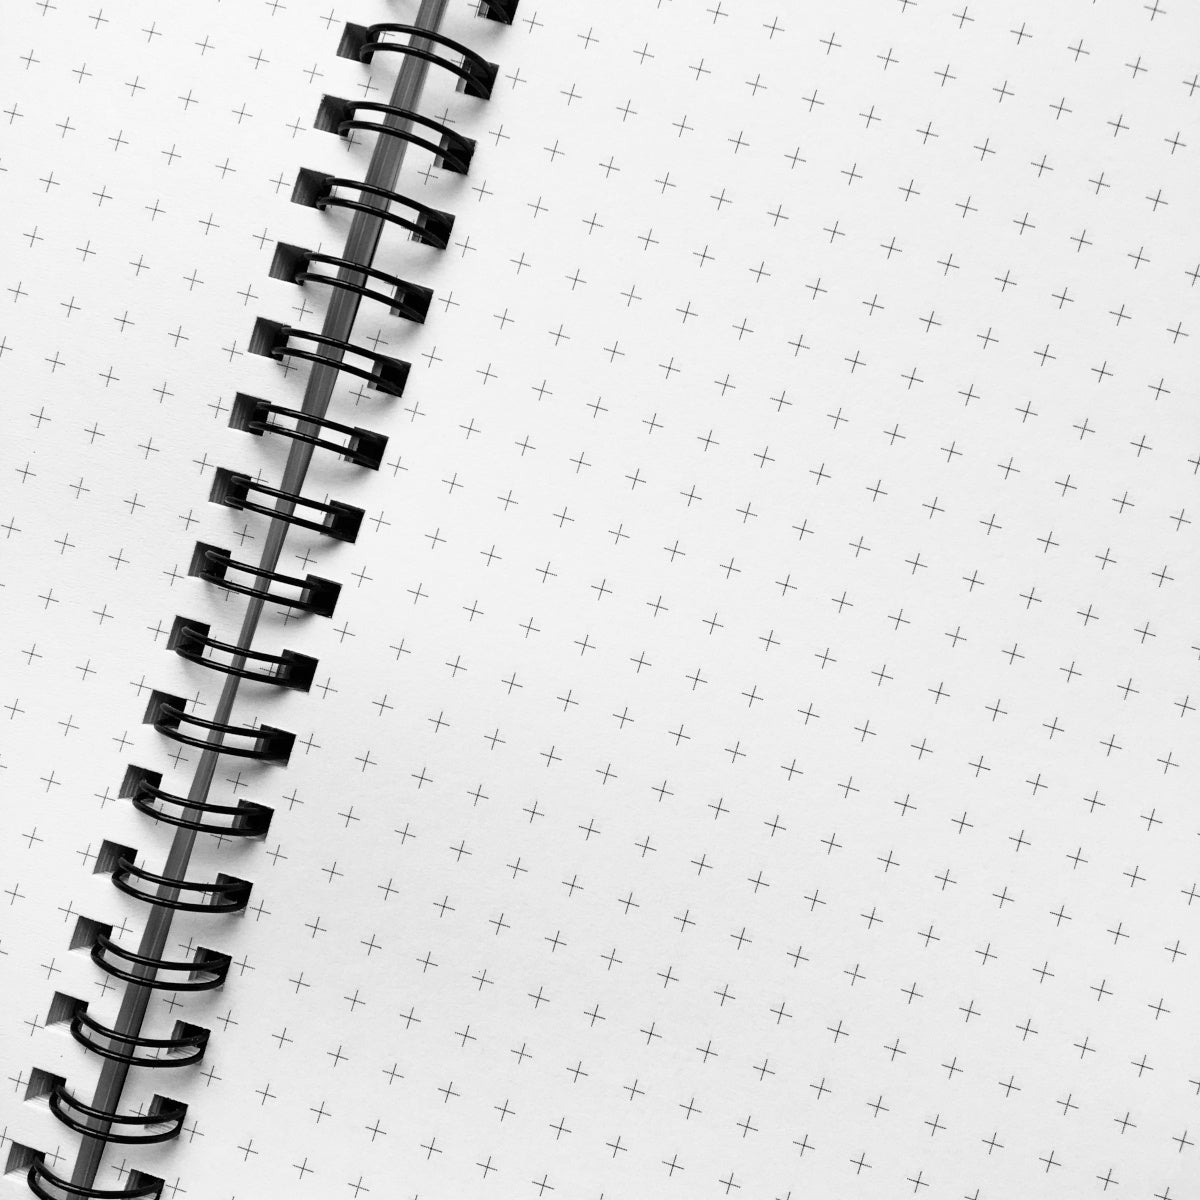 A close up of a spiral notebook open flat with white pages and little intersecting crosses of the grid graph paper.